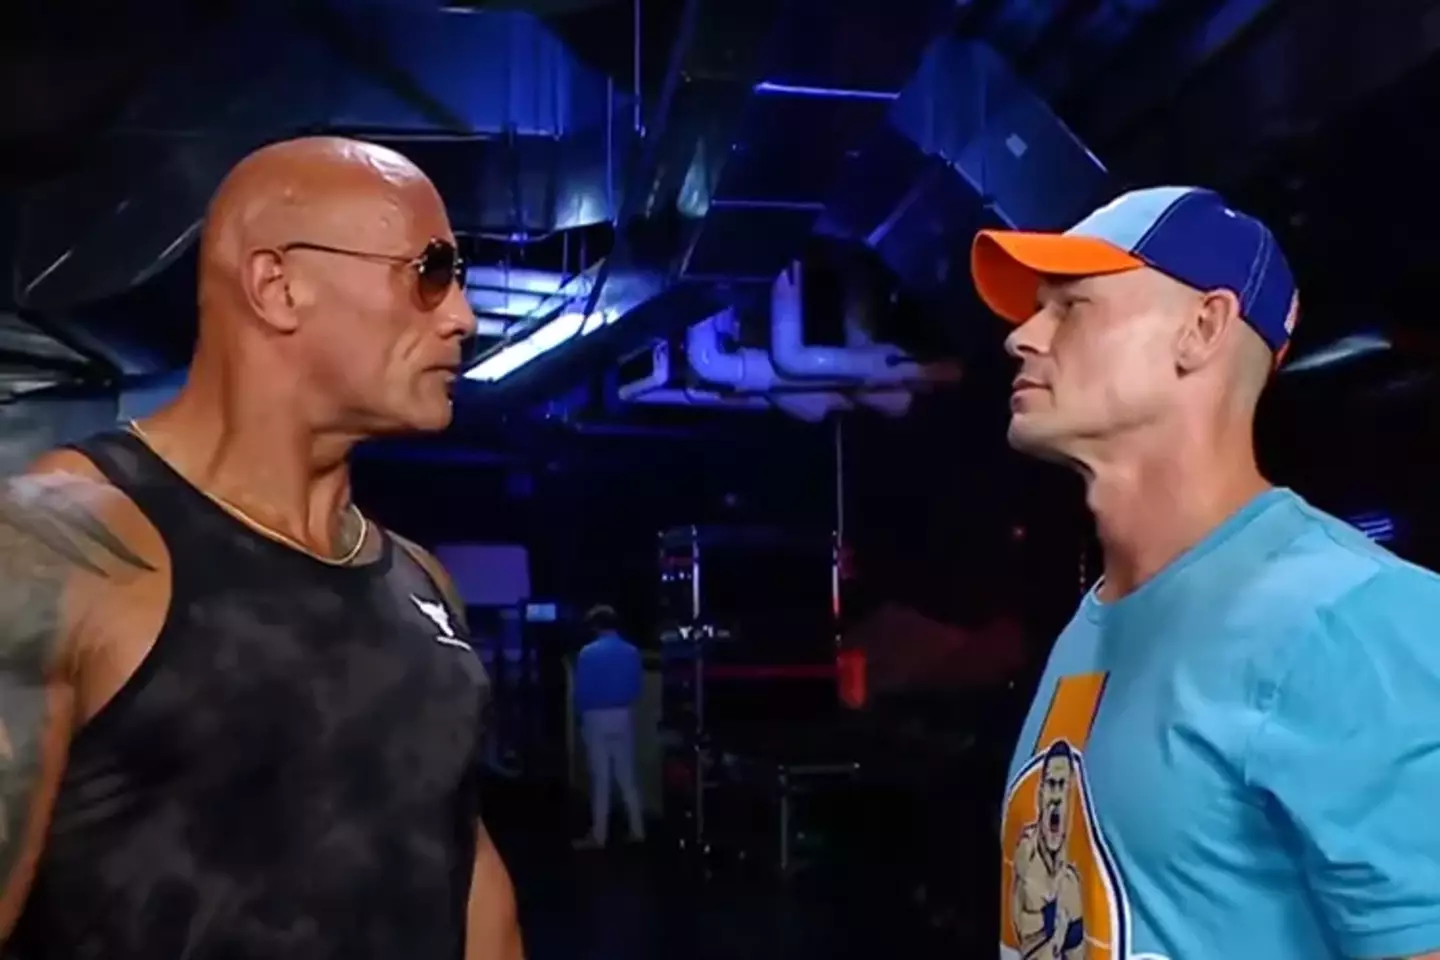 The Rock and John Cena reunited backstage during Friday's WWE SmackDown.